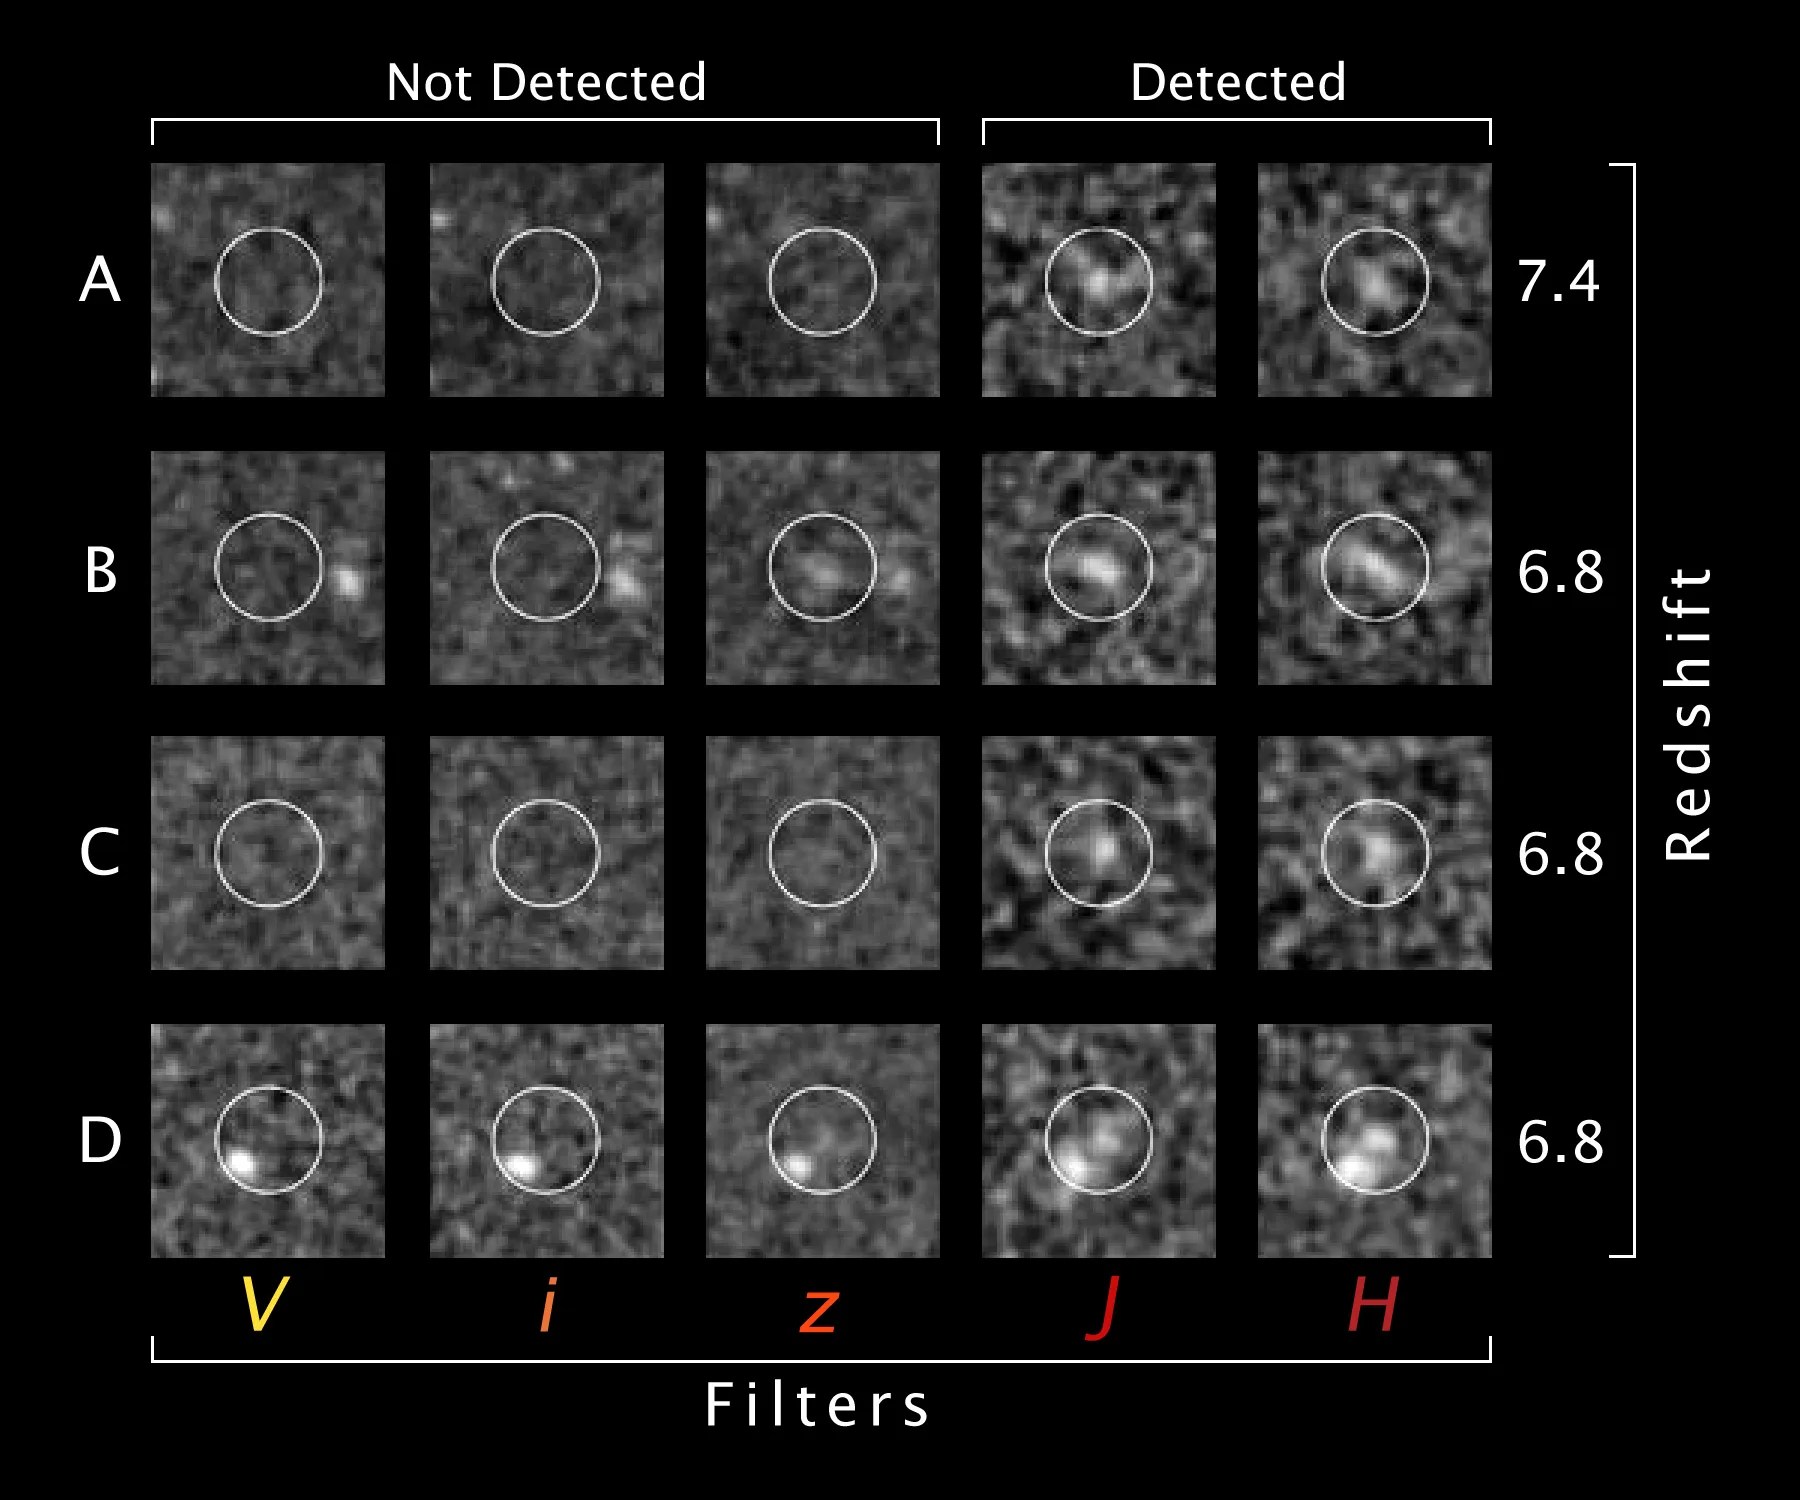 Four rows represent and five columns. Each column represents a Hubble filter. Each row is a different redshift. The images in each cell are black and white representing the intensity of the light gathered by Hubble's instruments. 